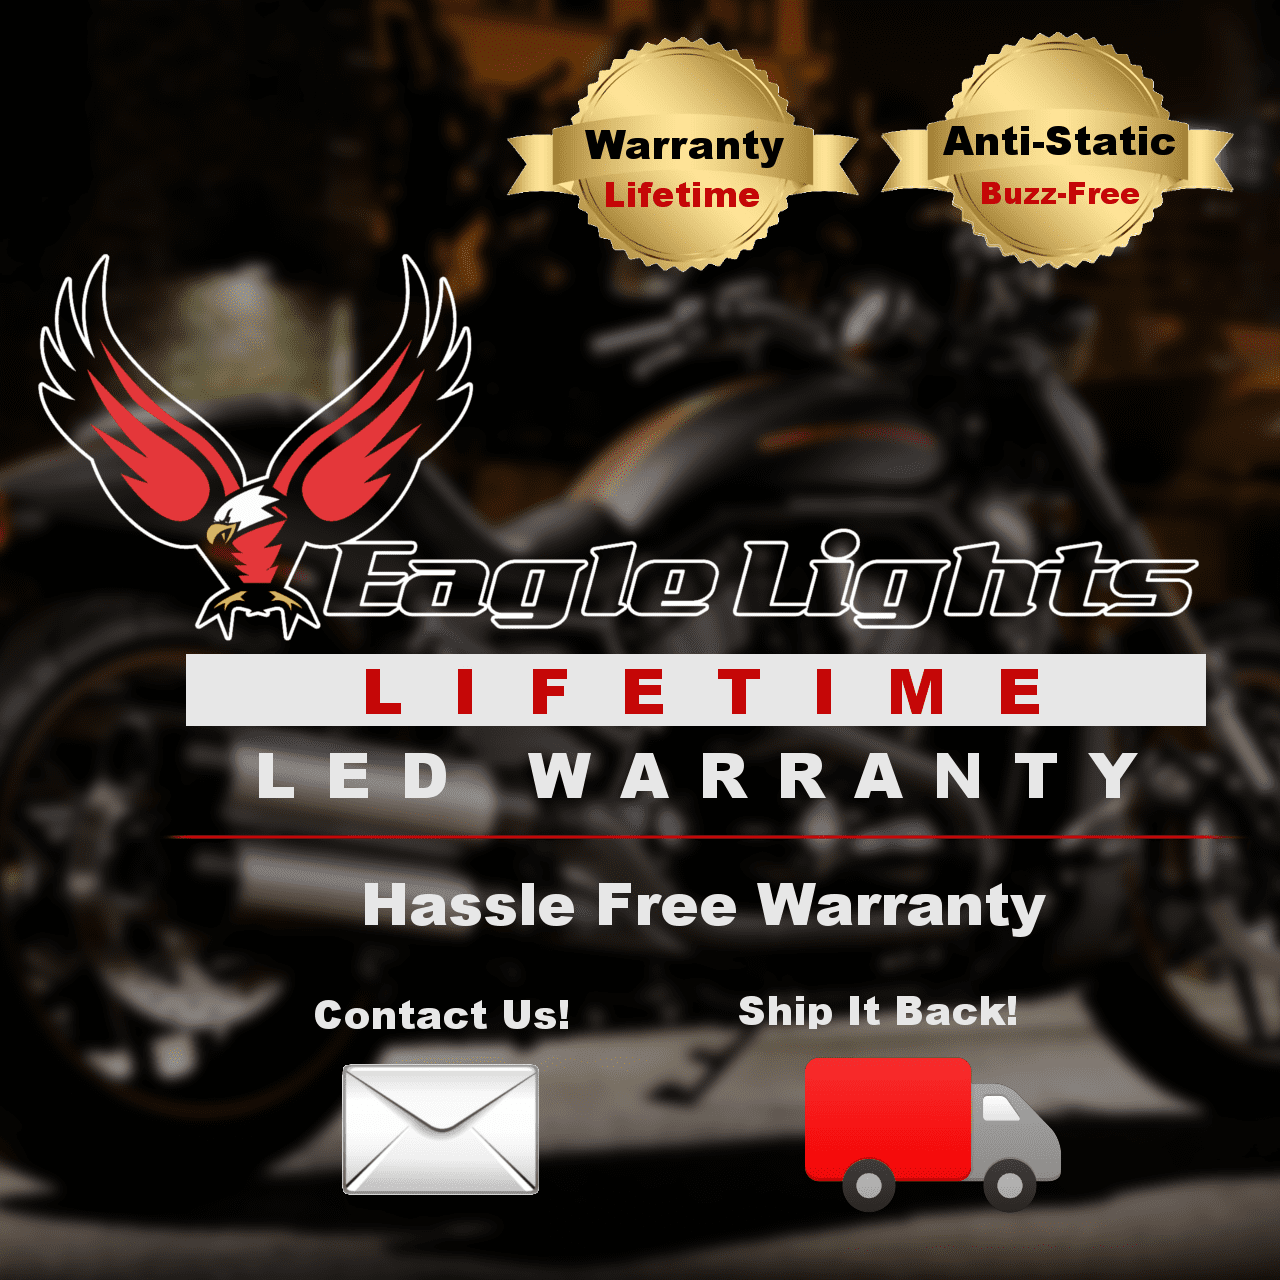 Eagle Lights Low Profile Flashing LED Brake Light with Built In Sequential LED Turn Signal Kit for 1998 and Older Harley Davidson Motorcycles